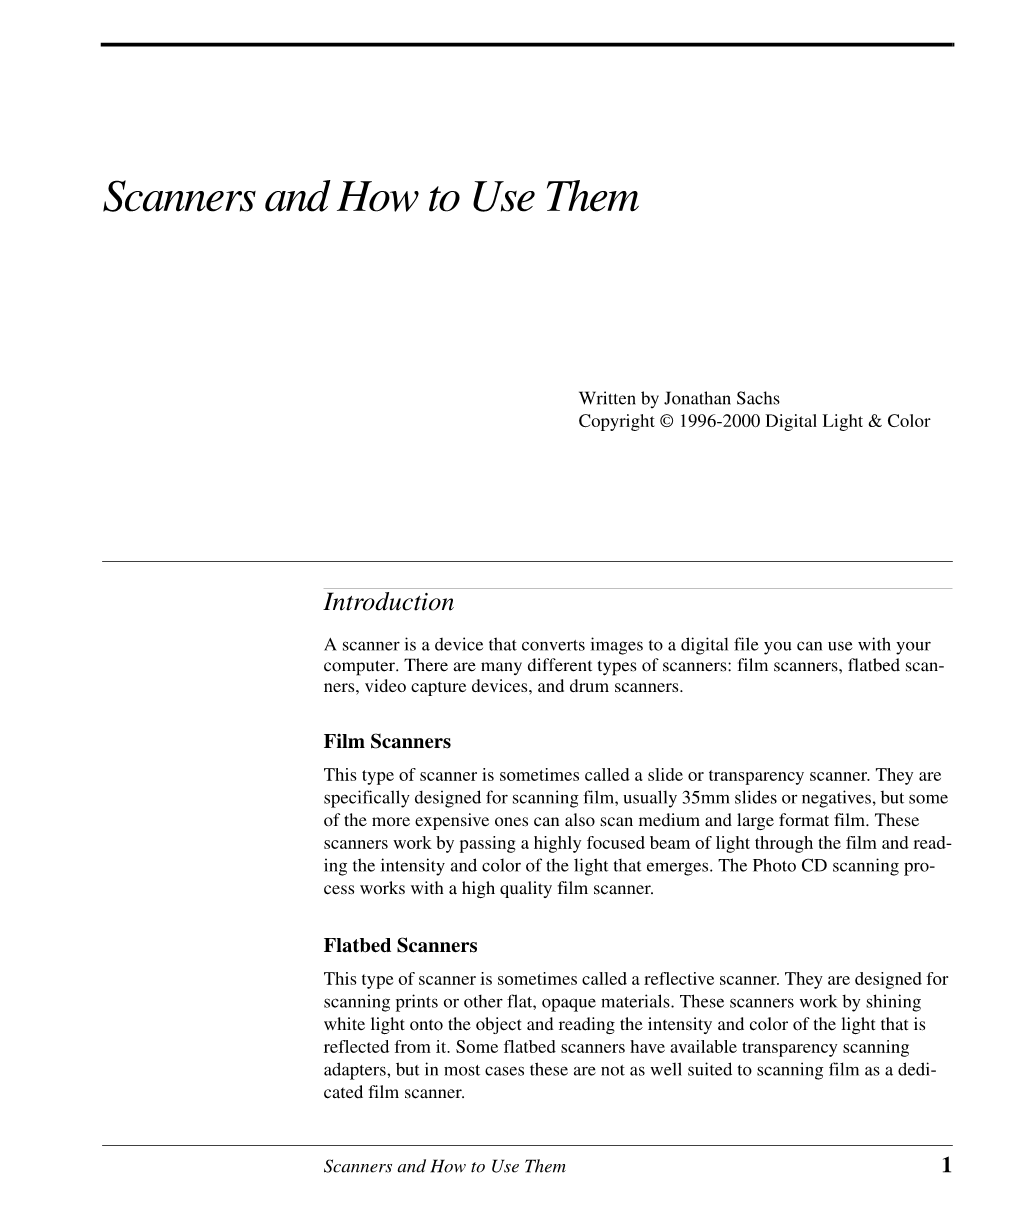 Scanners and How to Use Them